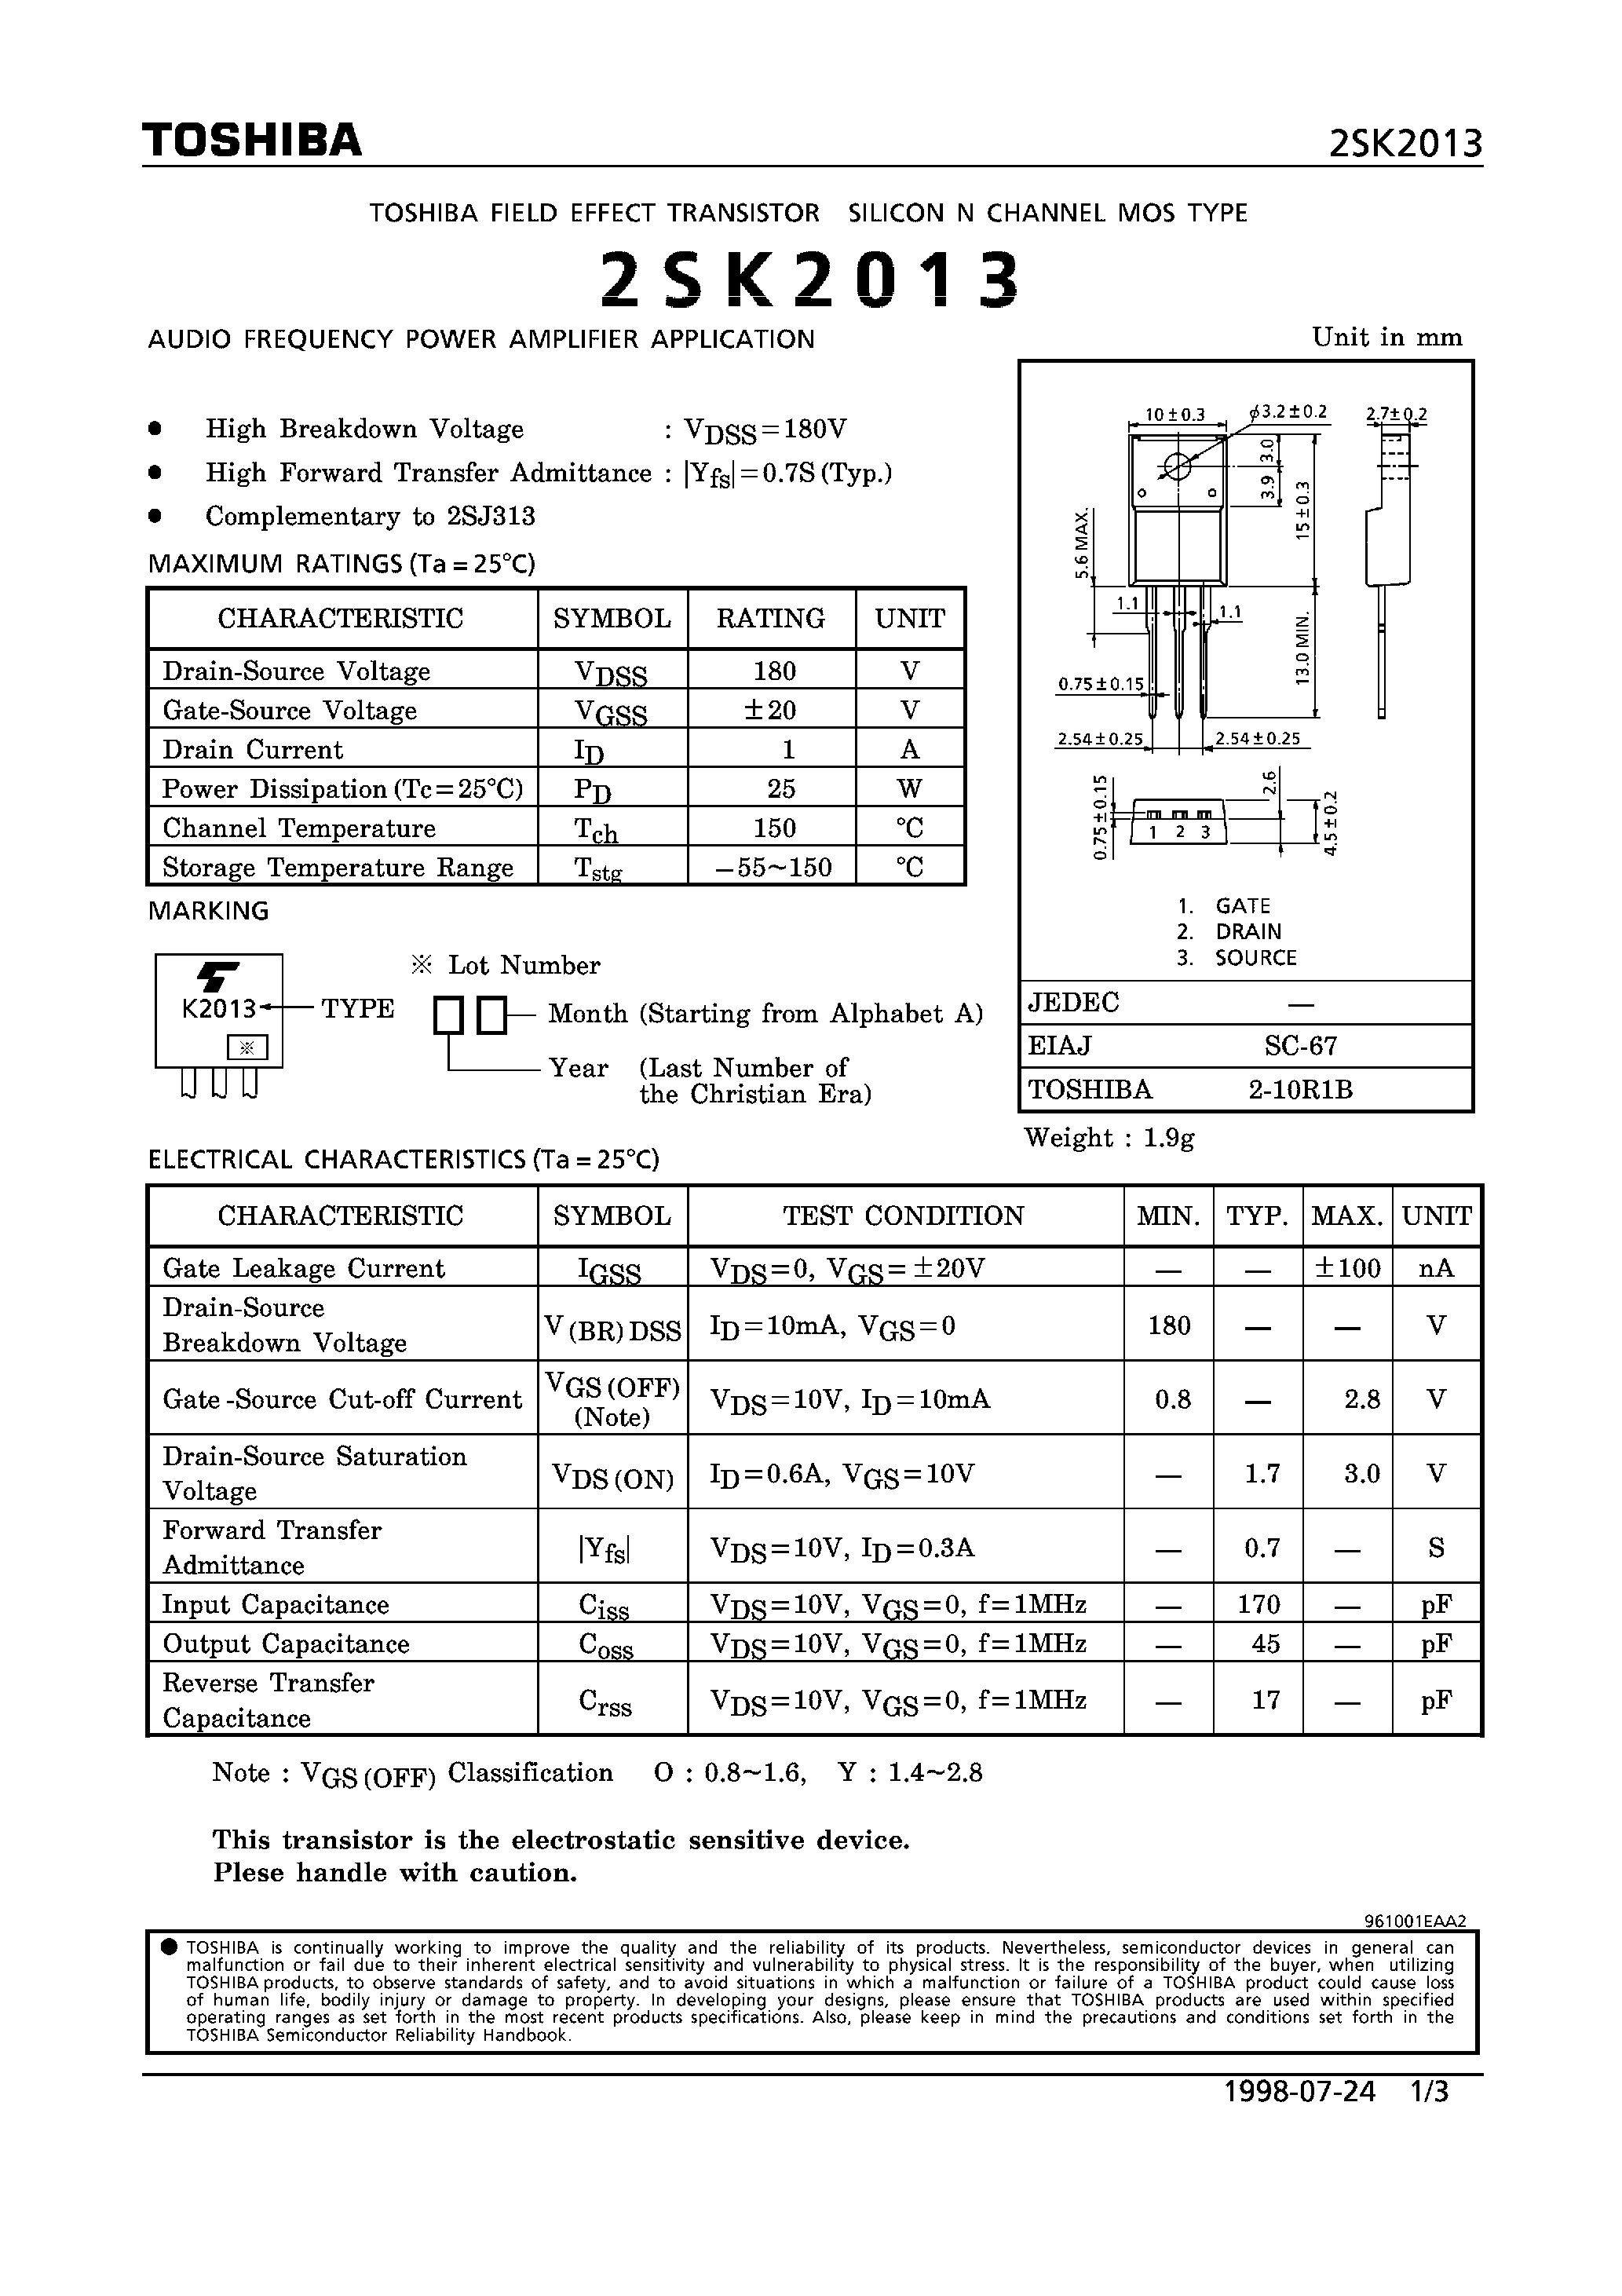 Datasheet 2SK2013 - N CHANNEL MOS TYPE (AUDIO FREQUENCY POWER AMPLIFIER APPLICATION) page 1